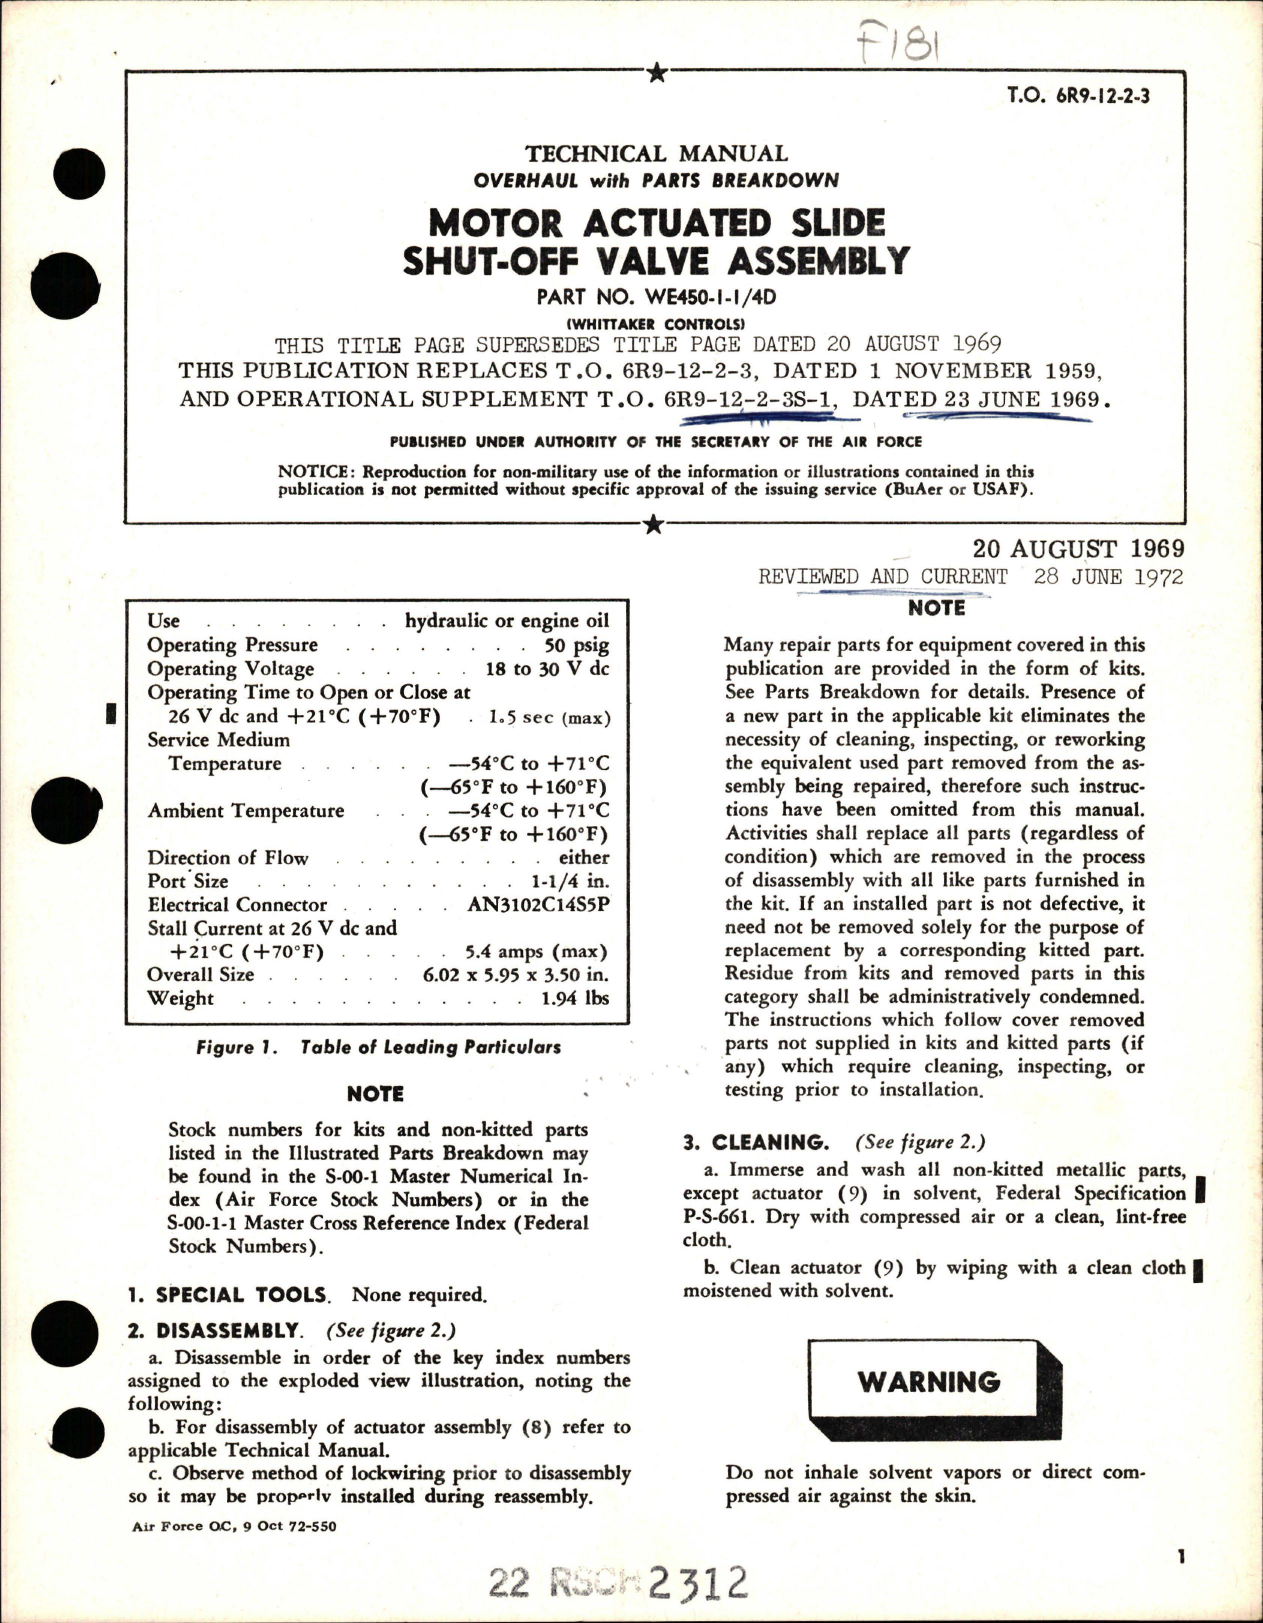 Sample page 1 from AirCorps Library document: Overhaul with Parts Breakdown for Motor Actuated Slide Shut-Off Valve Assembly - Part WE-450-1-1-4D 